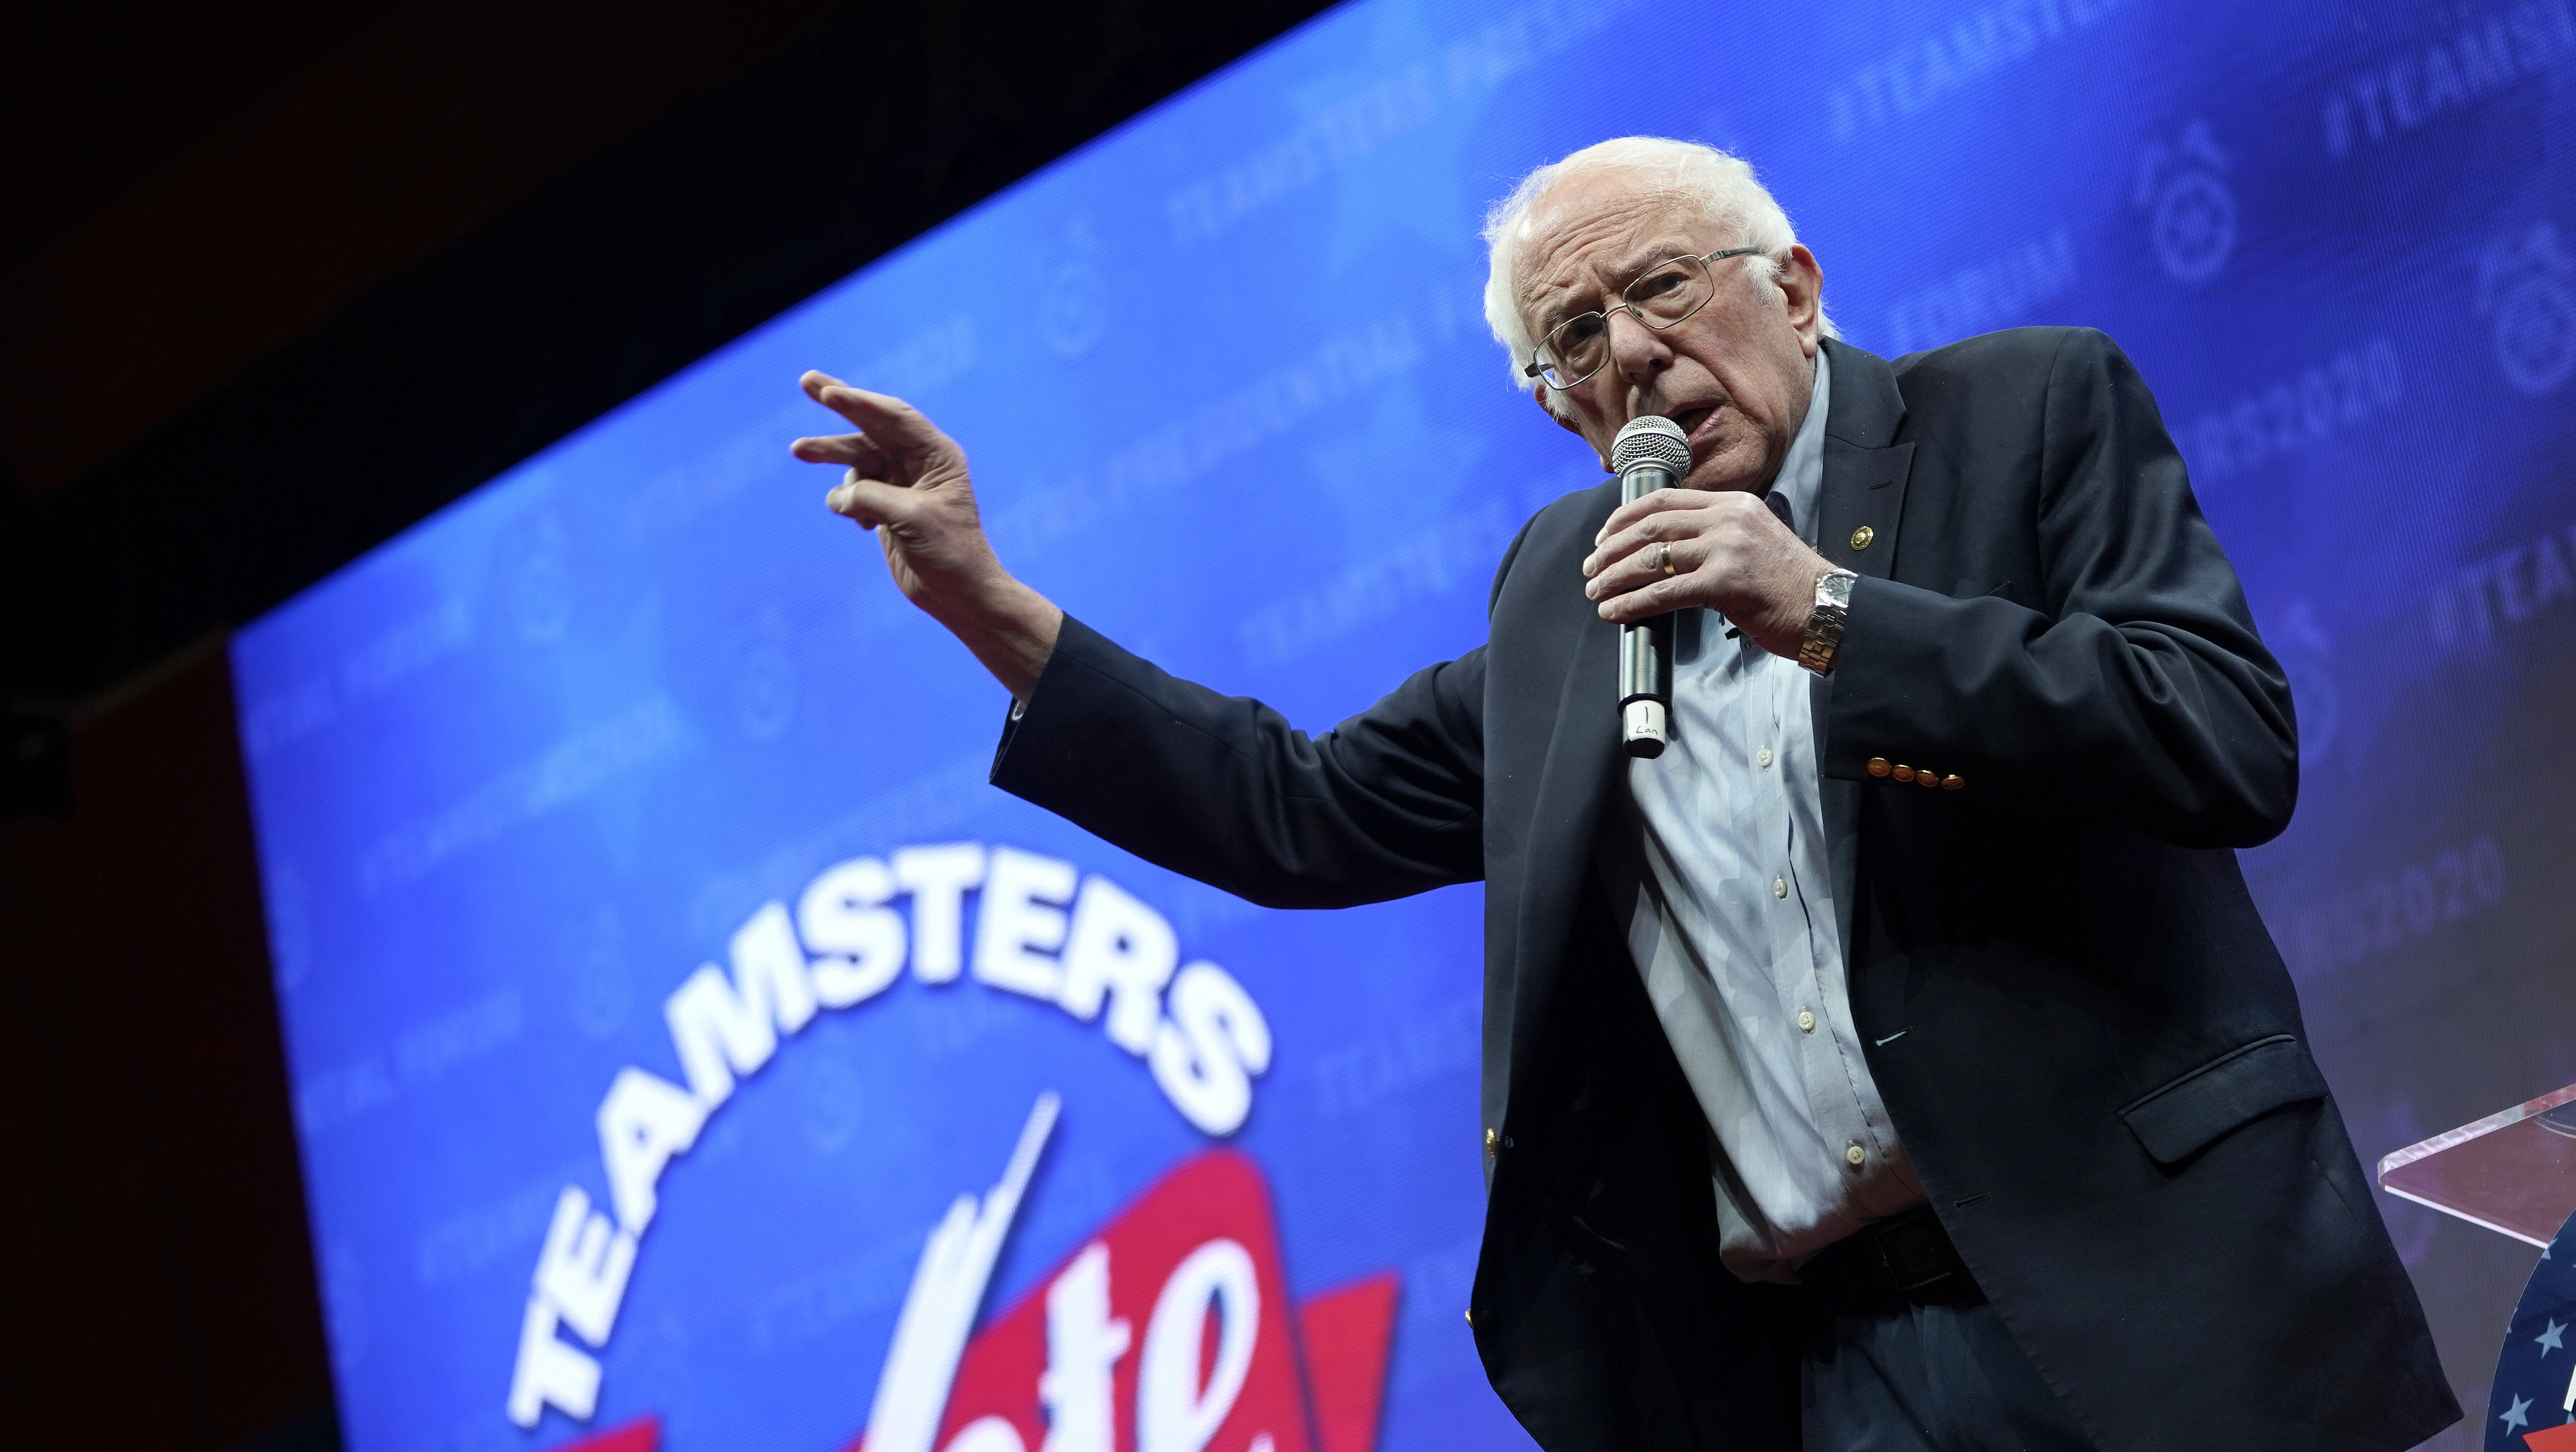 Sanders Wins ExPat Vote but Too Little Too Late